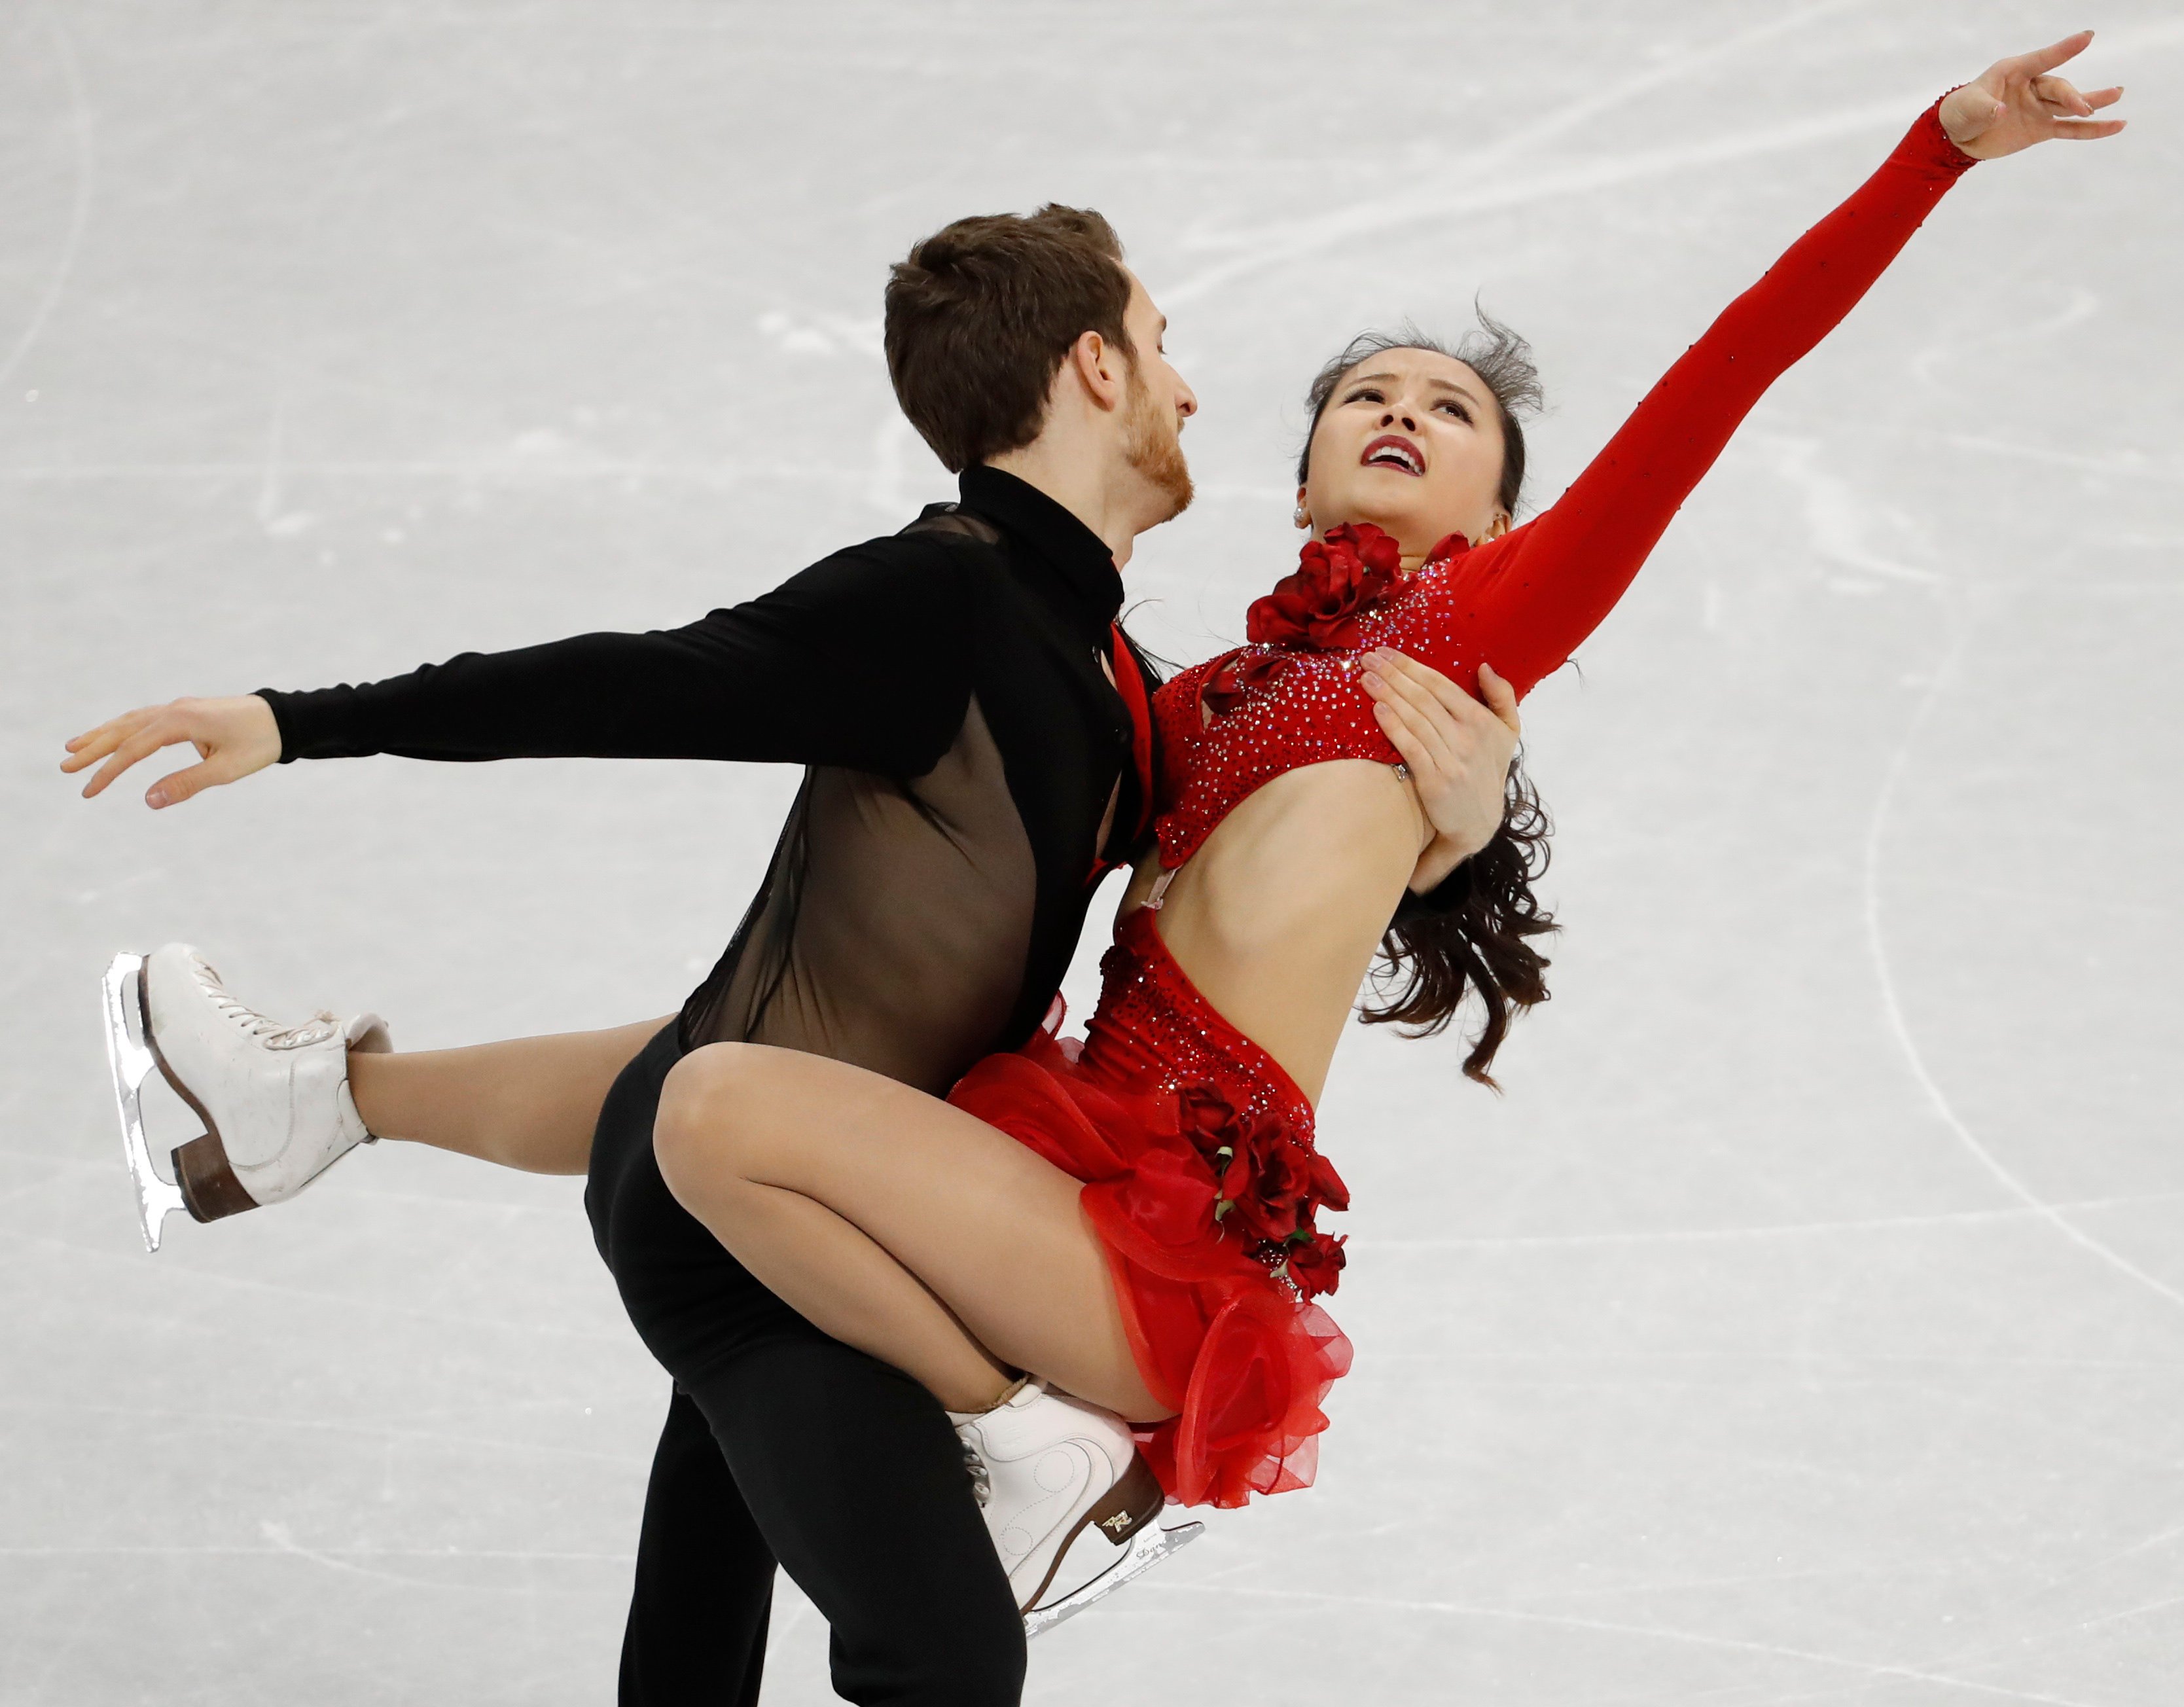 Wardrobe Malfunction Causes Difficulty In Olympic Ice Skater